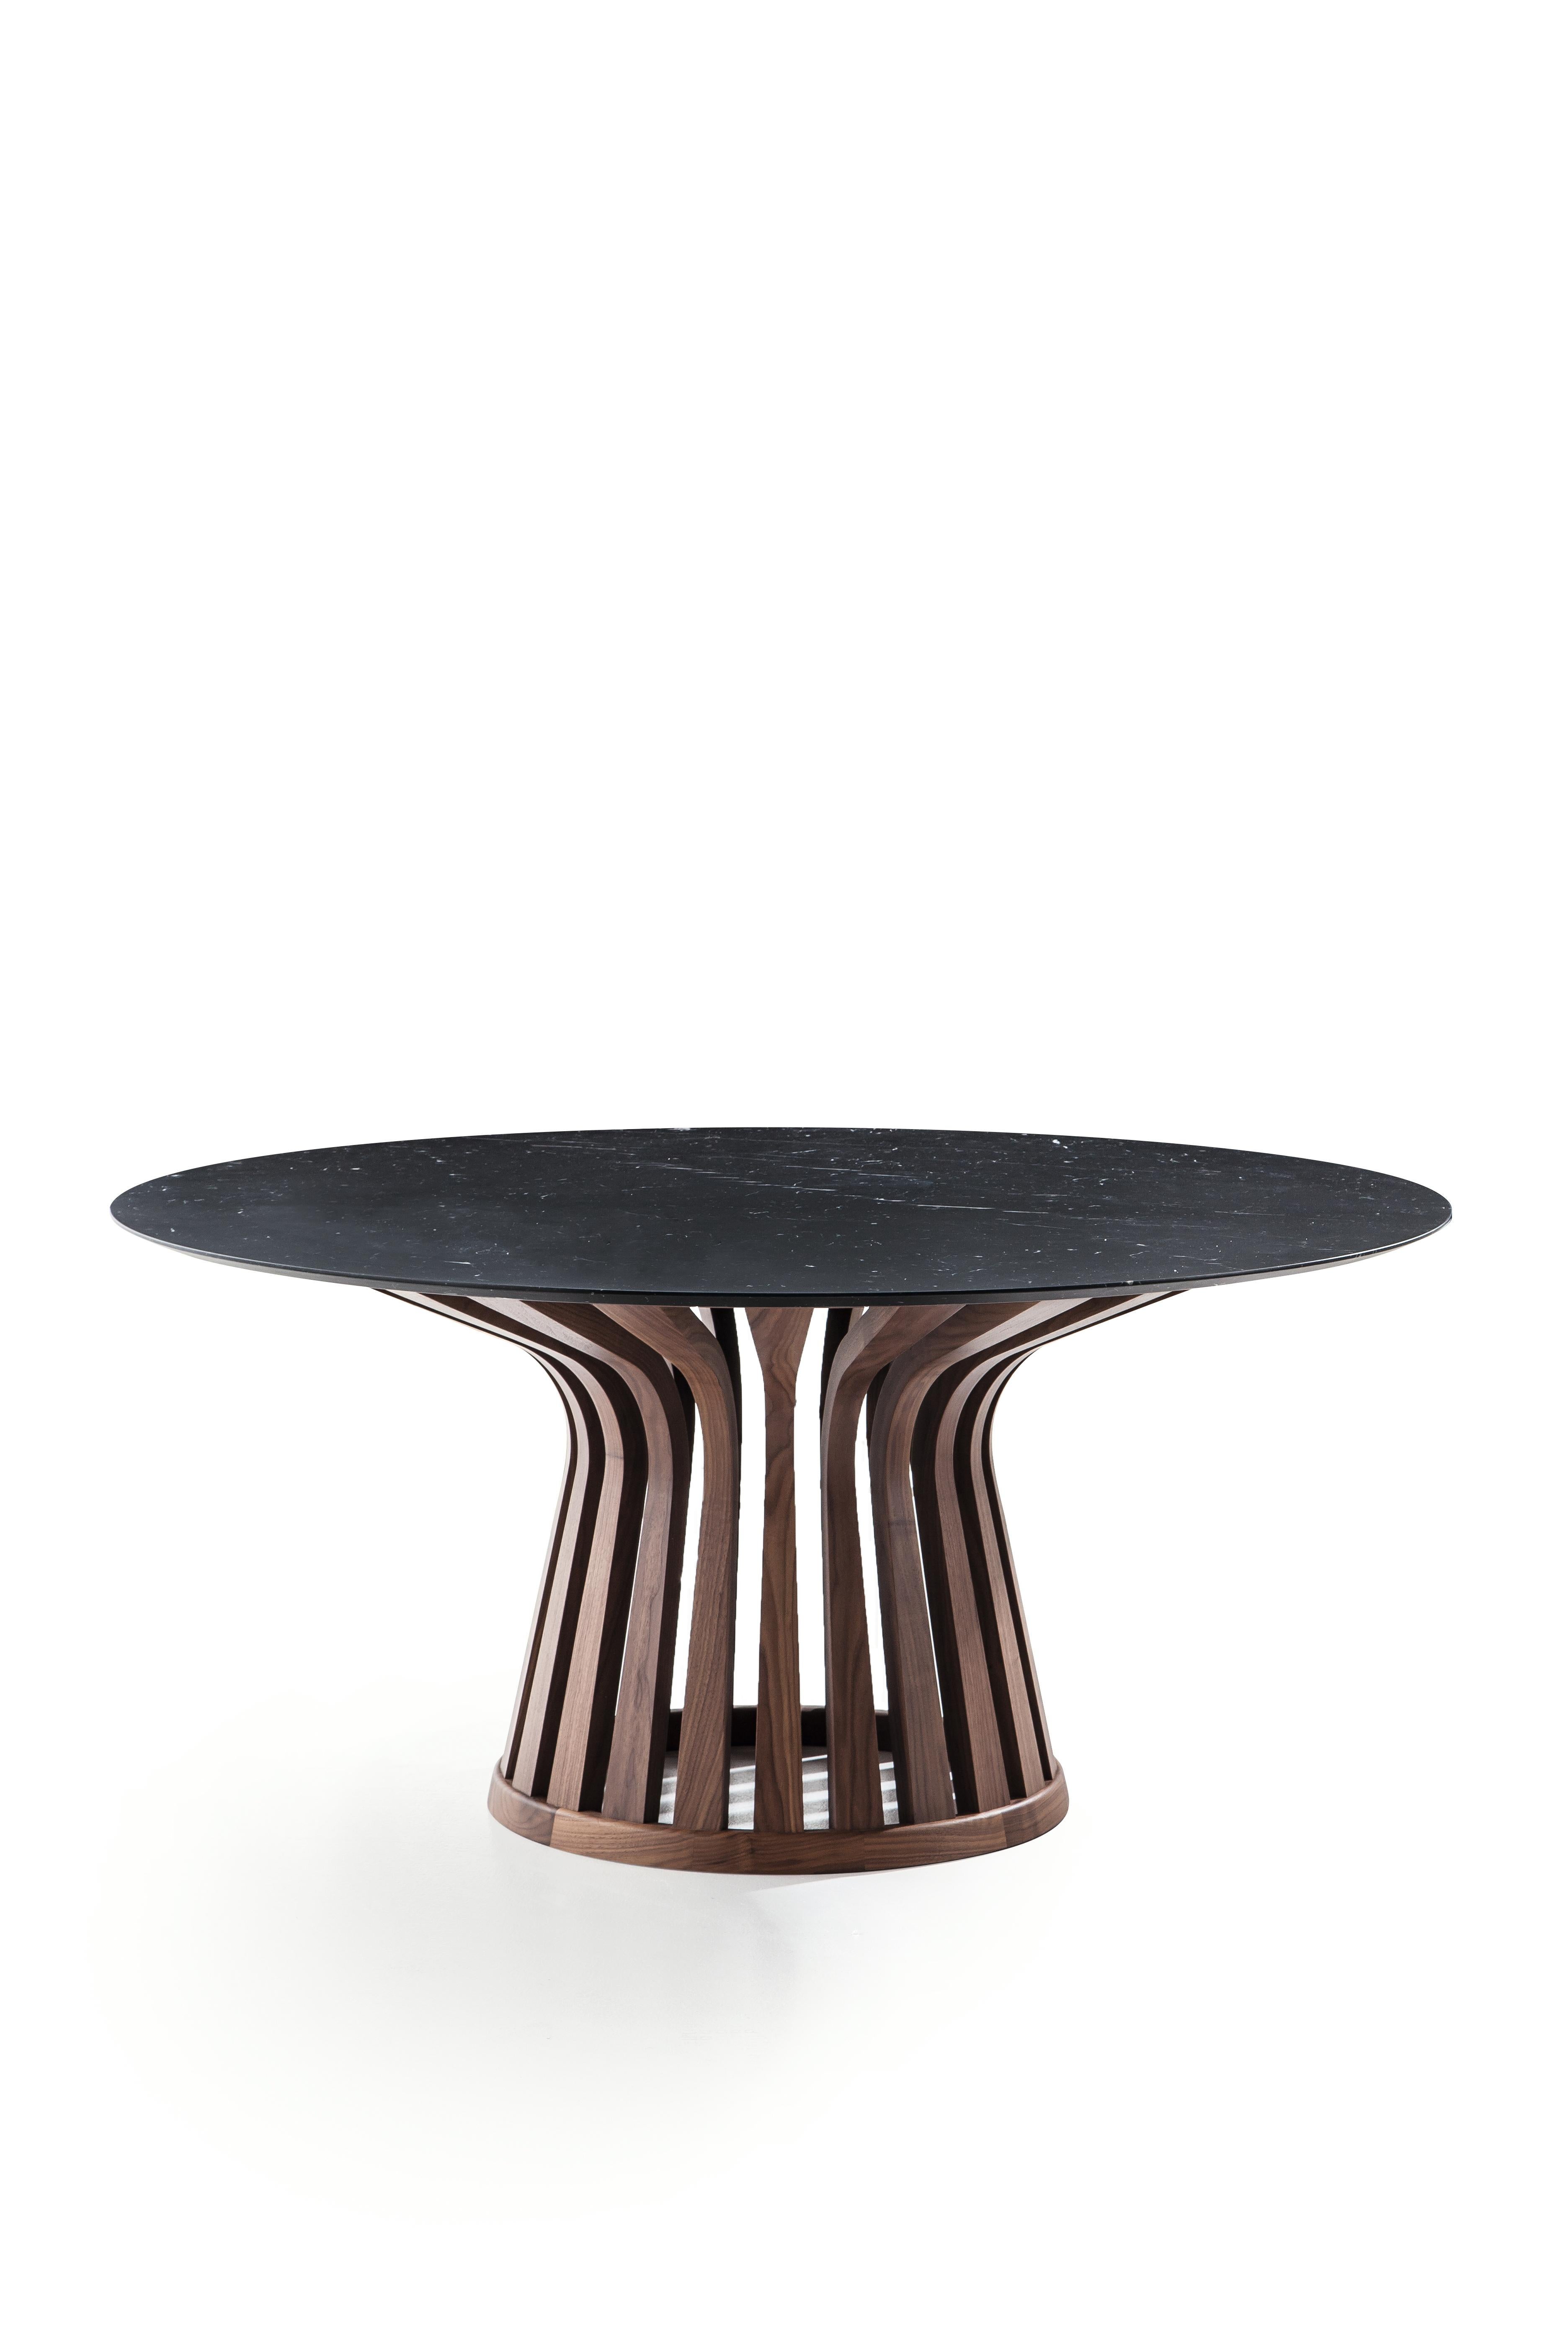 Aluminum Lebeau Wood and Marble Table by Patrick Jouin For Sale